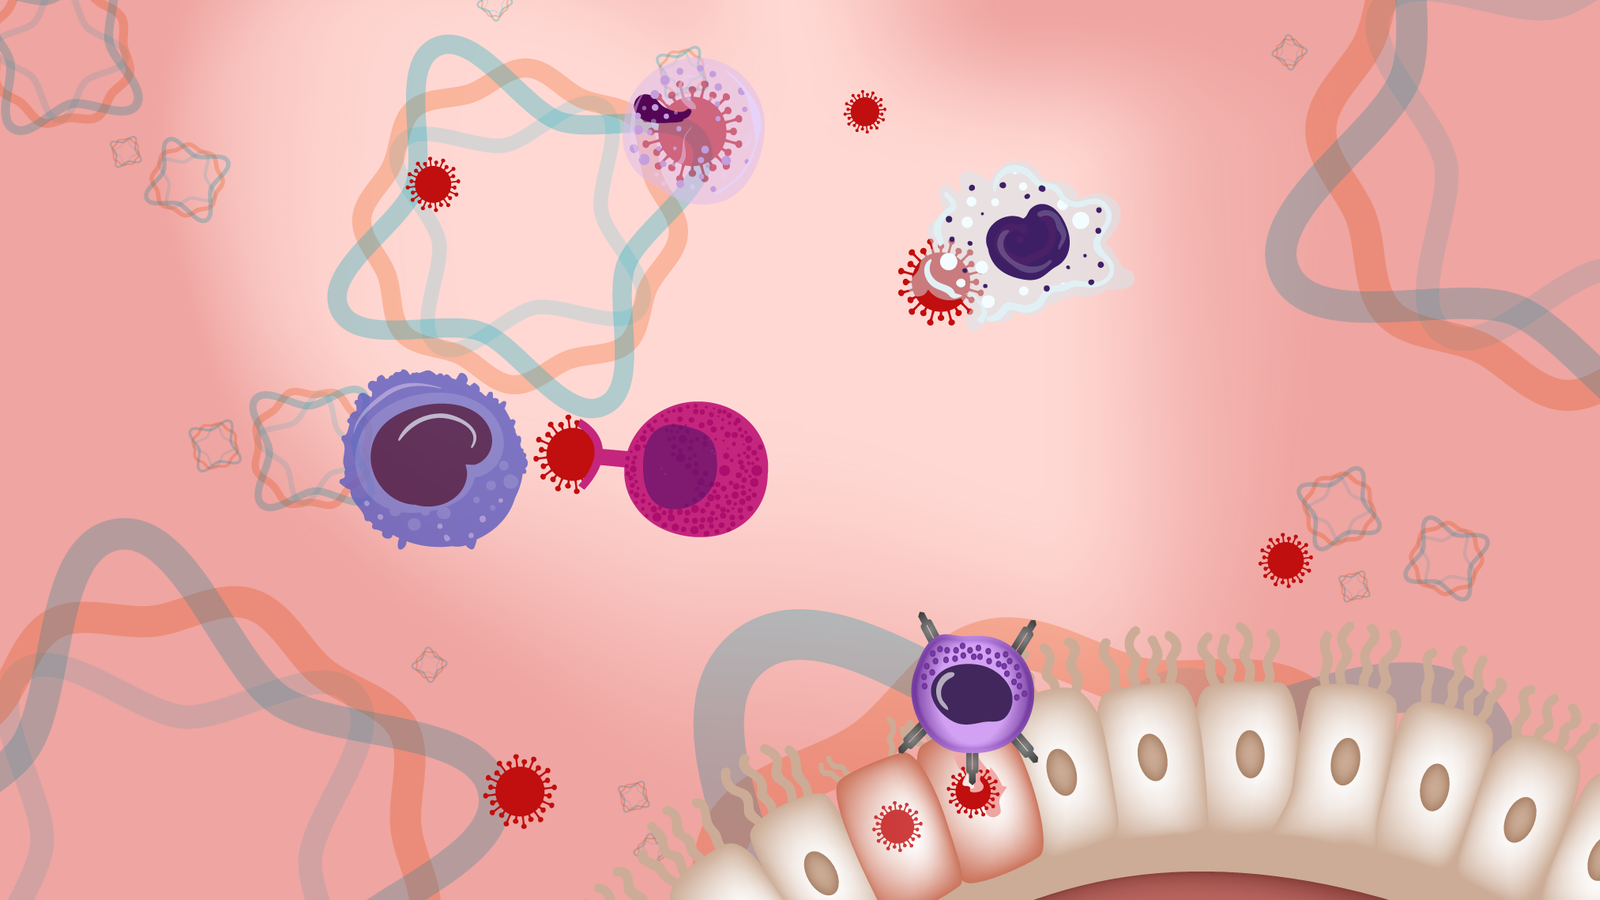 17.Infection-Immunite-BACKGROUND.png